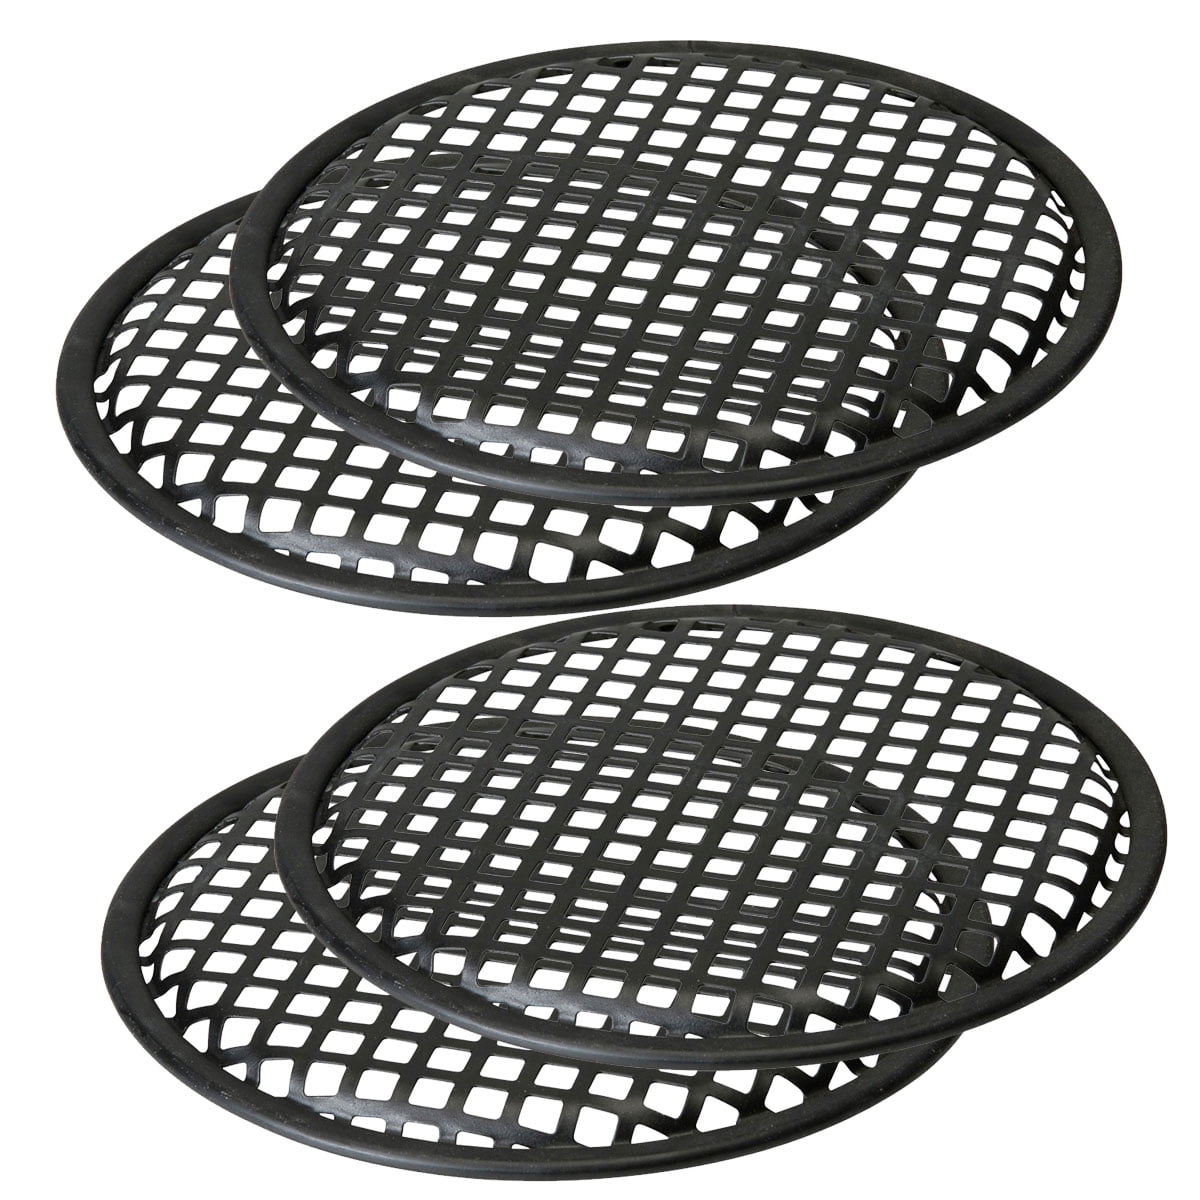 METAL MESH SPEAKER GRILL with RING #MGR10 10" UNIVERSAL 2-PIECE STEEL 